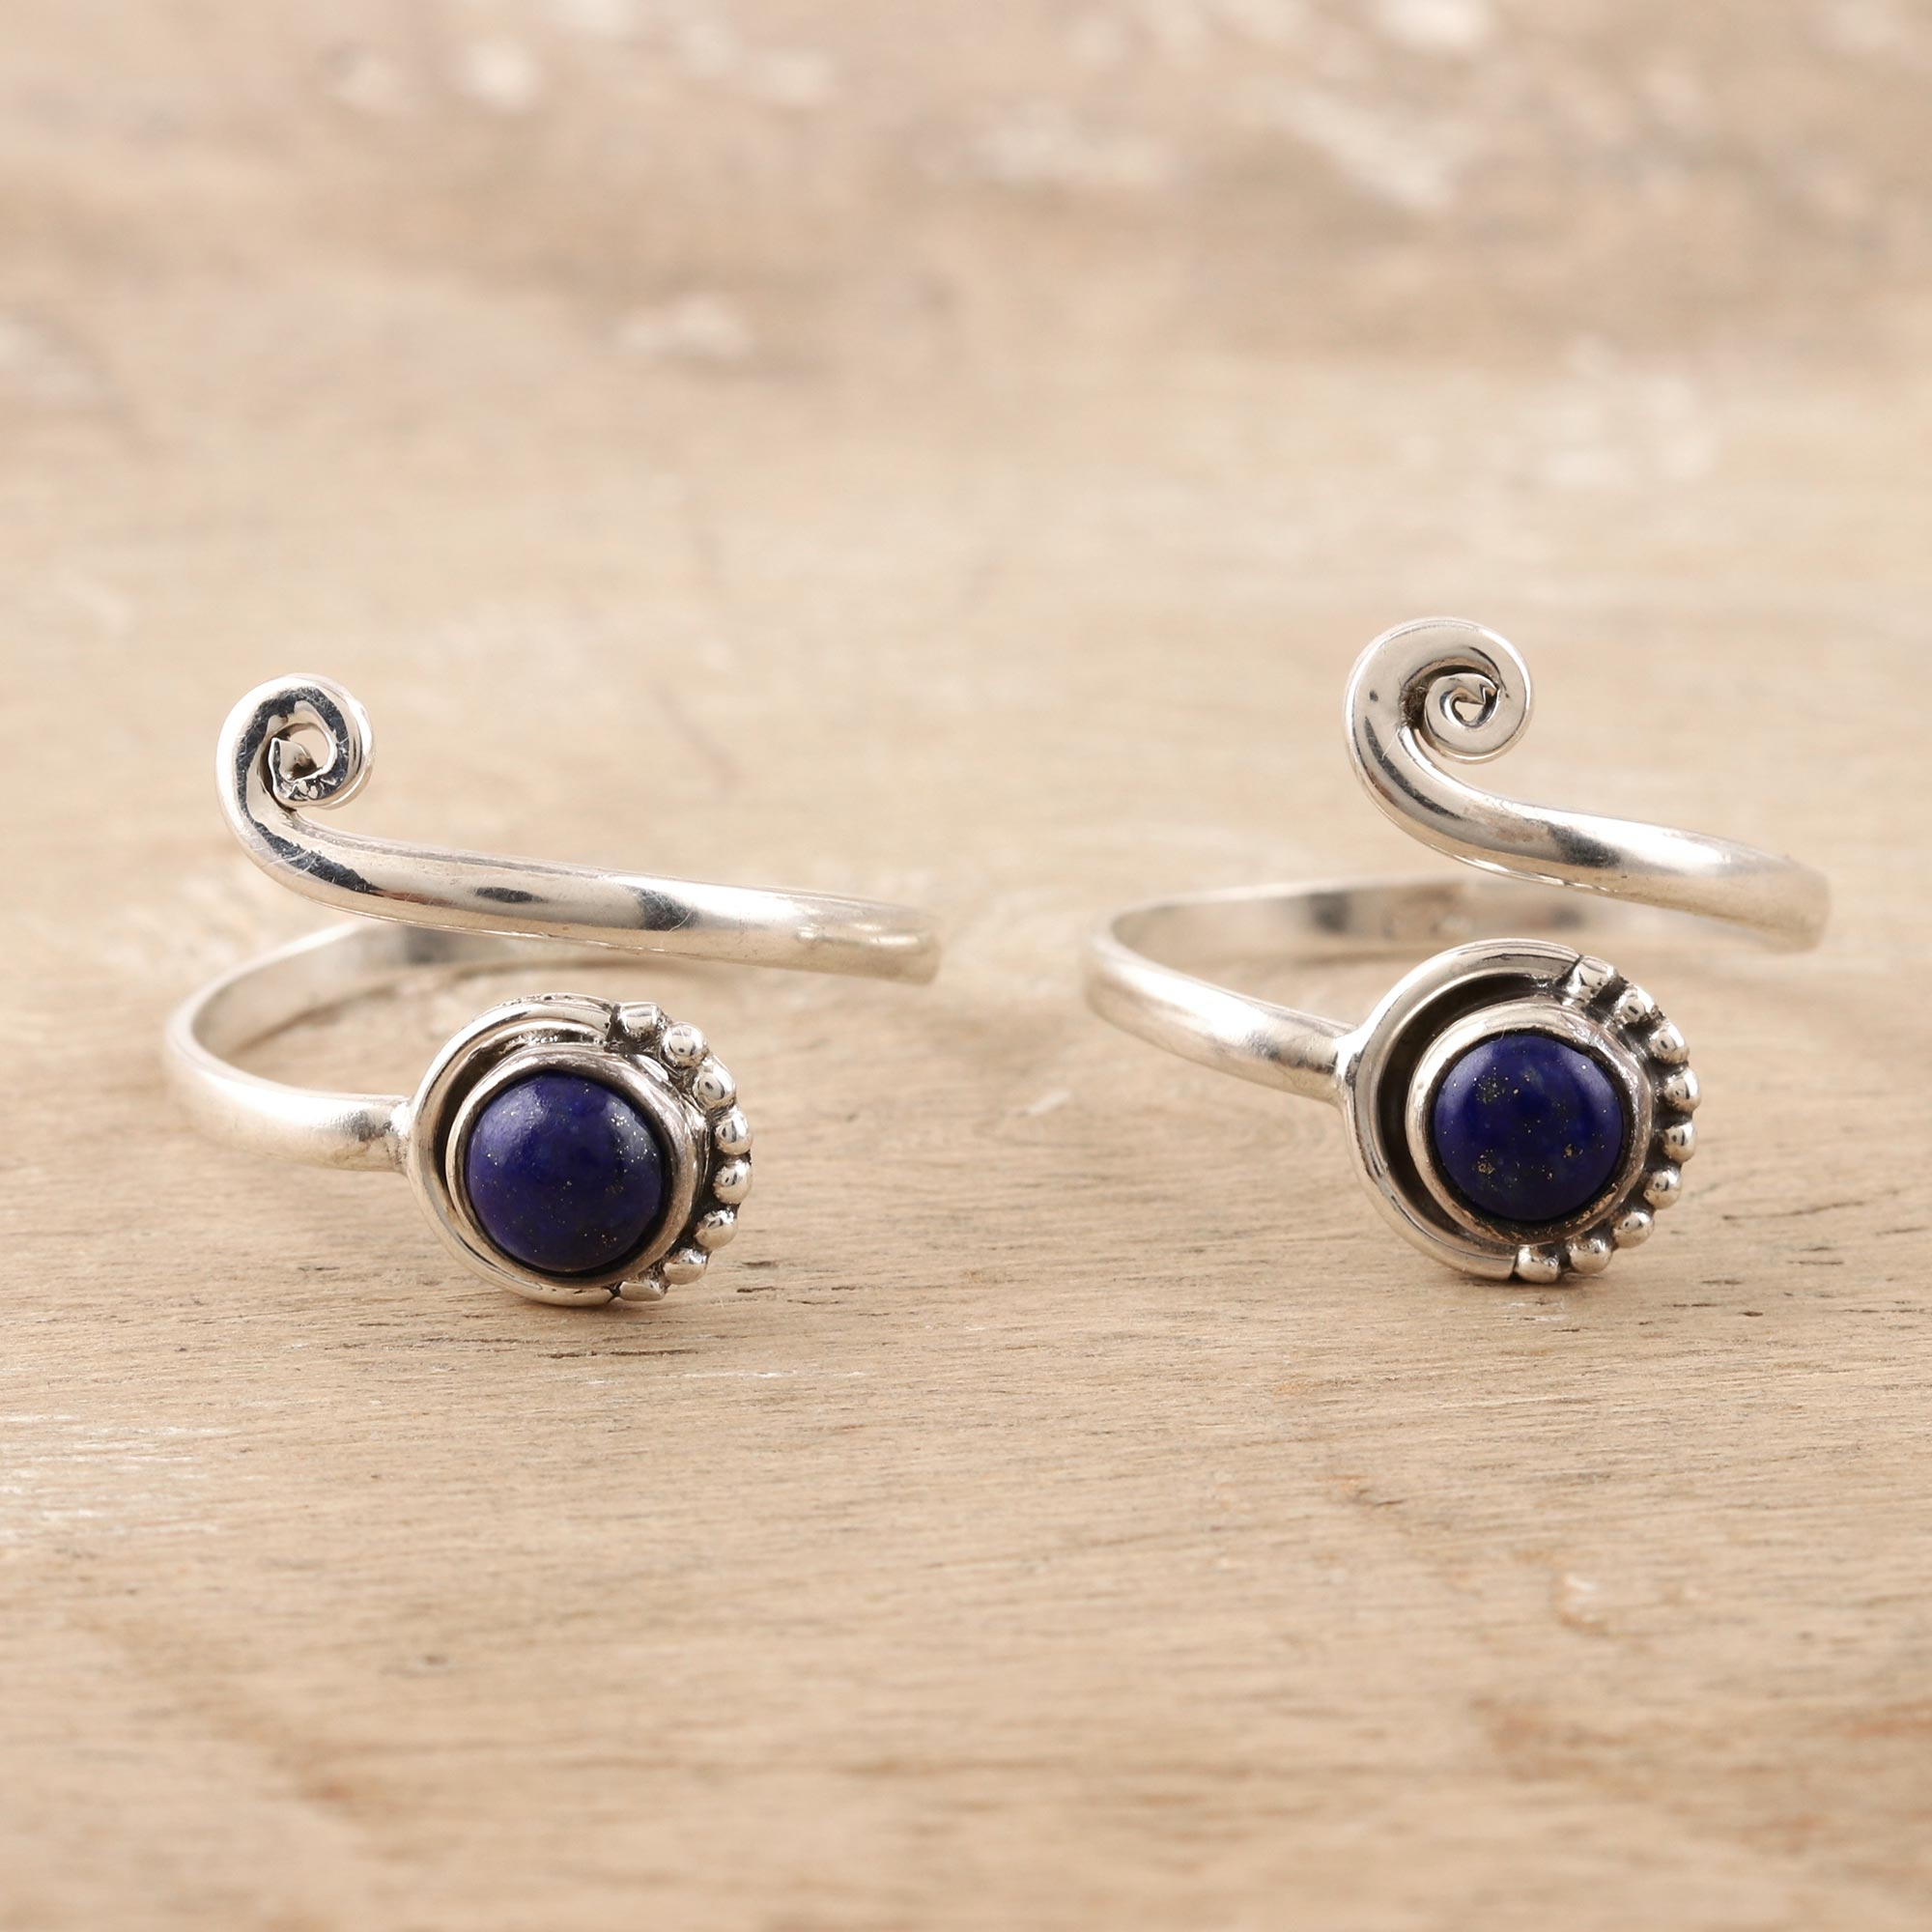 Sterling Silver and Lapis Lazuli Toe Rings (Pair) - Royal Eddy